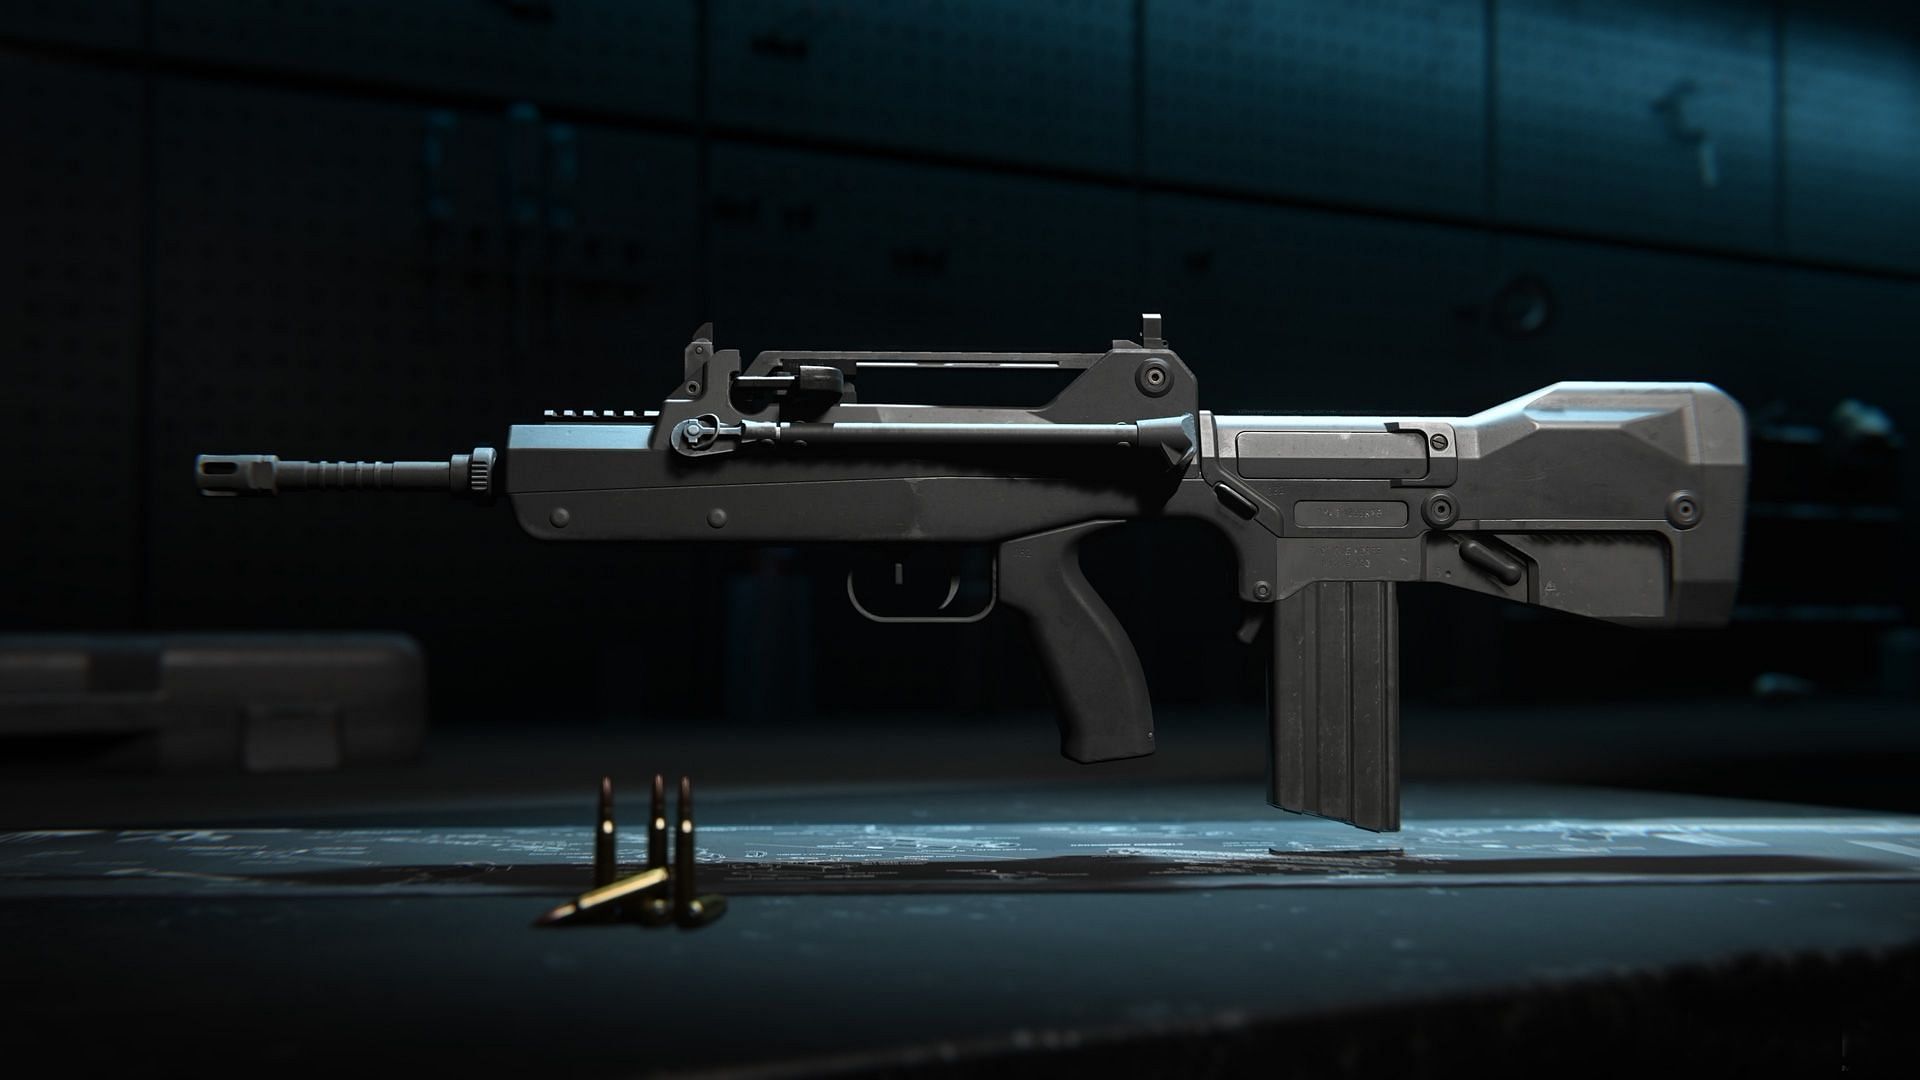 FF Advancer Assault Rifle in Warzone 2 (Image via Activision)